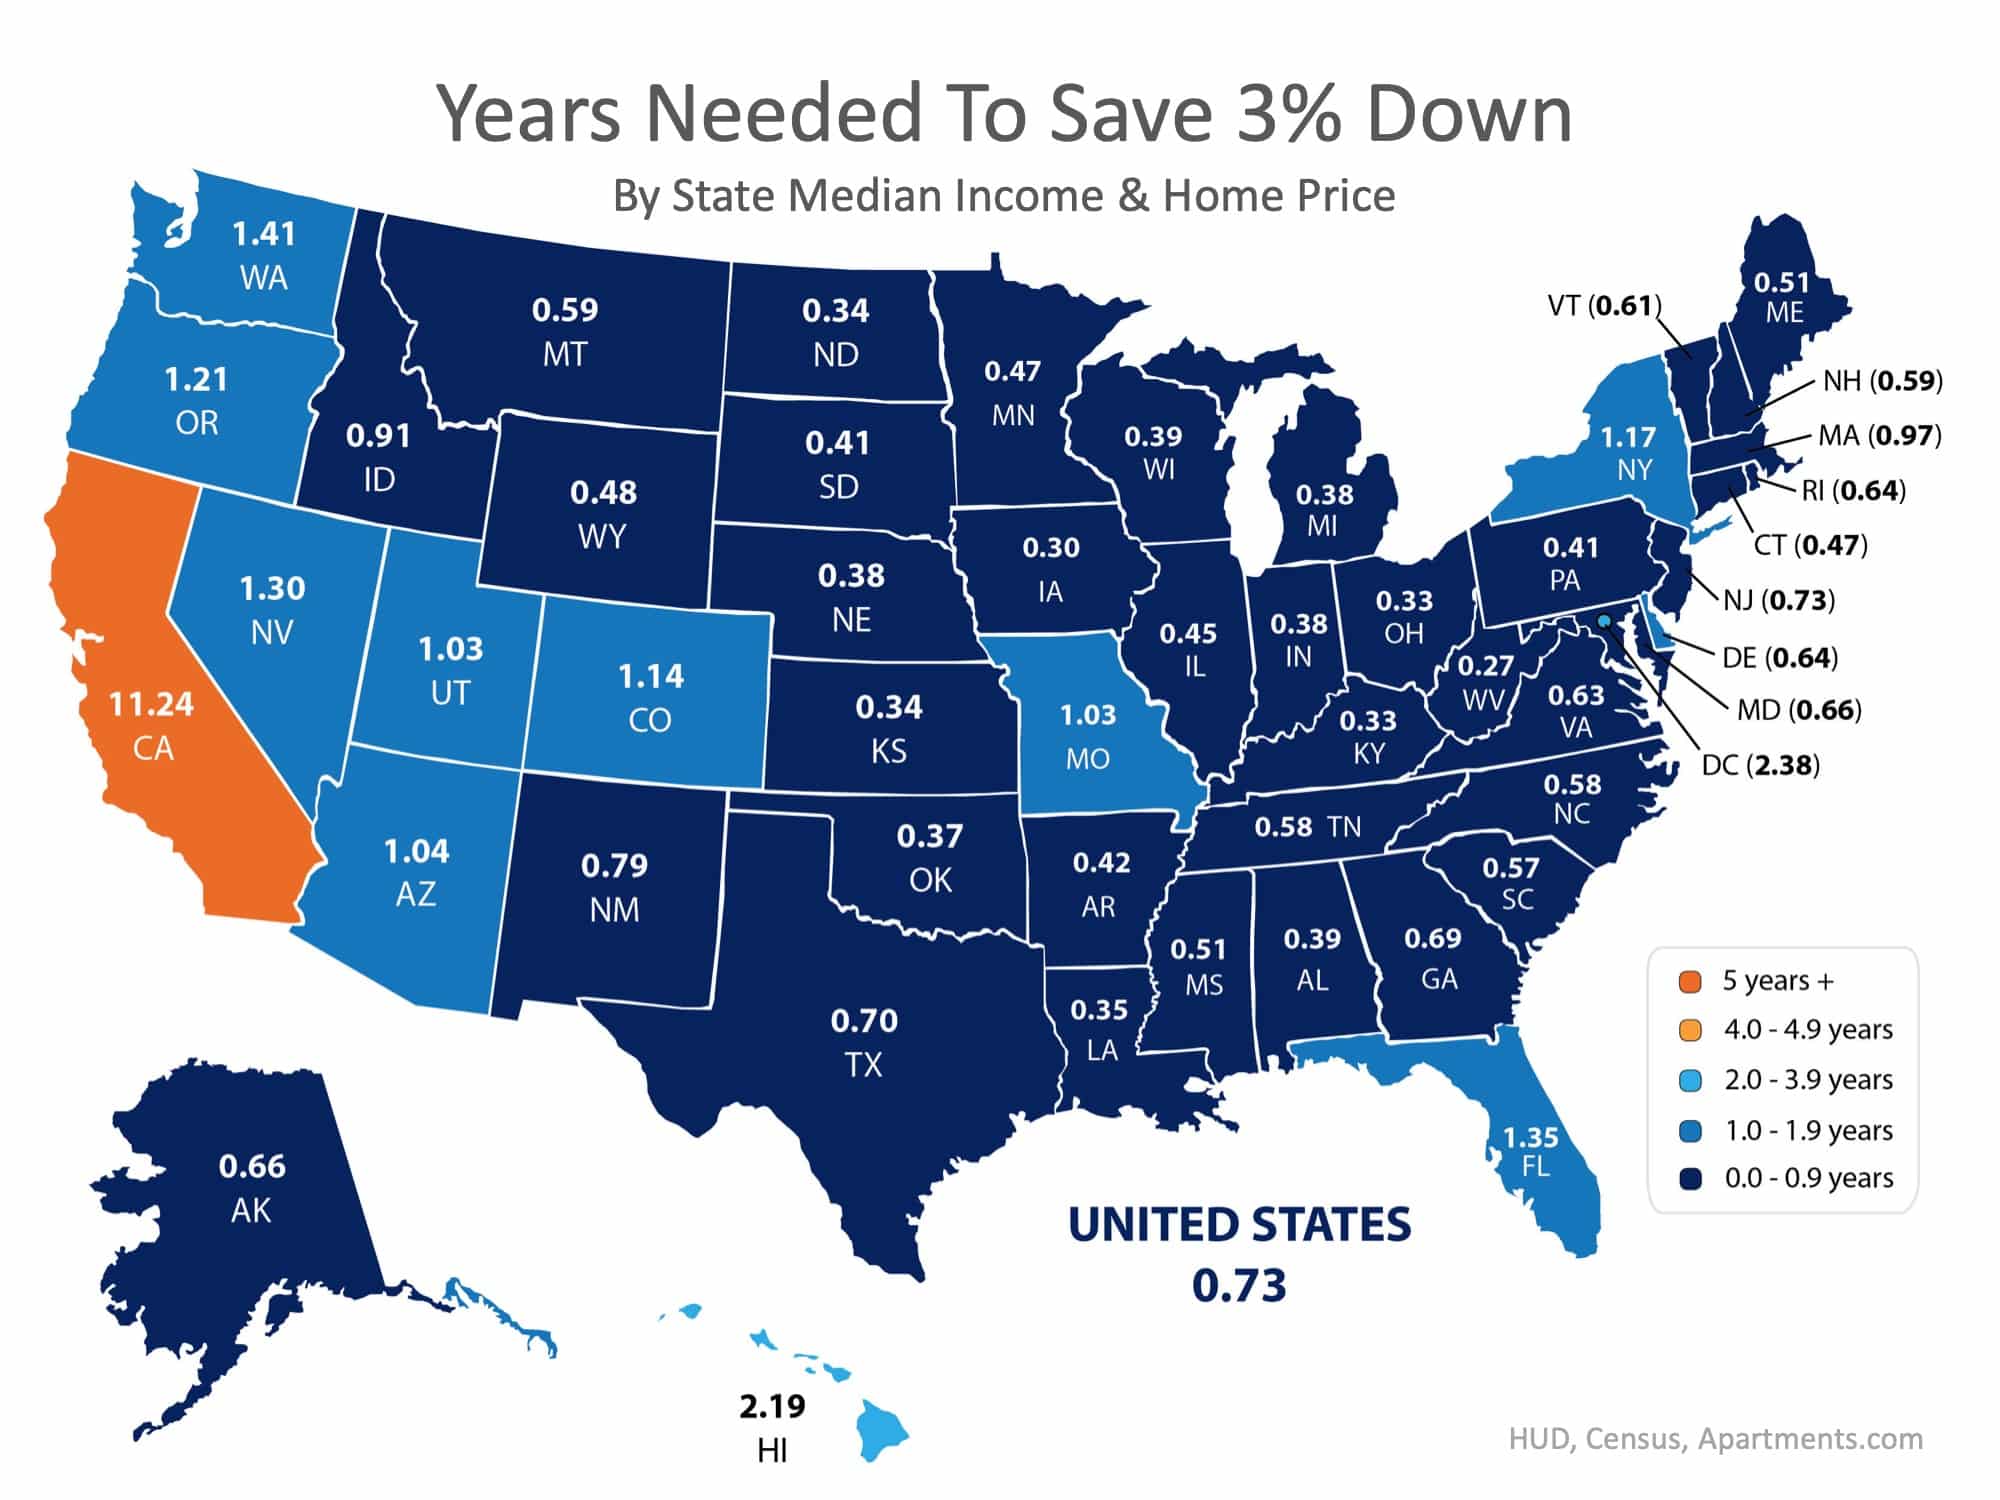 How Quickly Can You Save Your Down Payment?